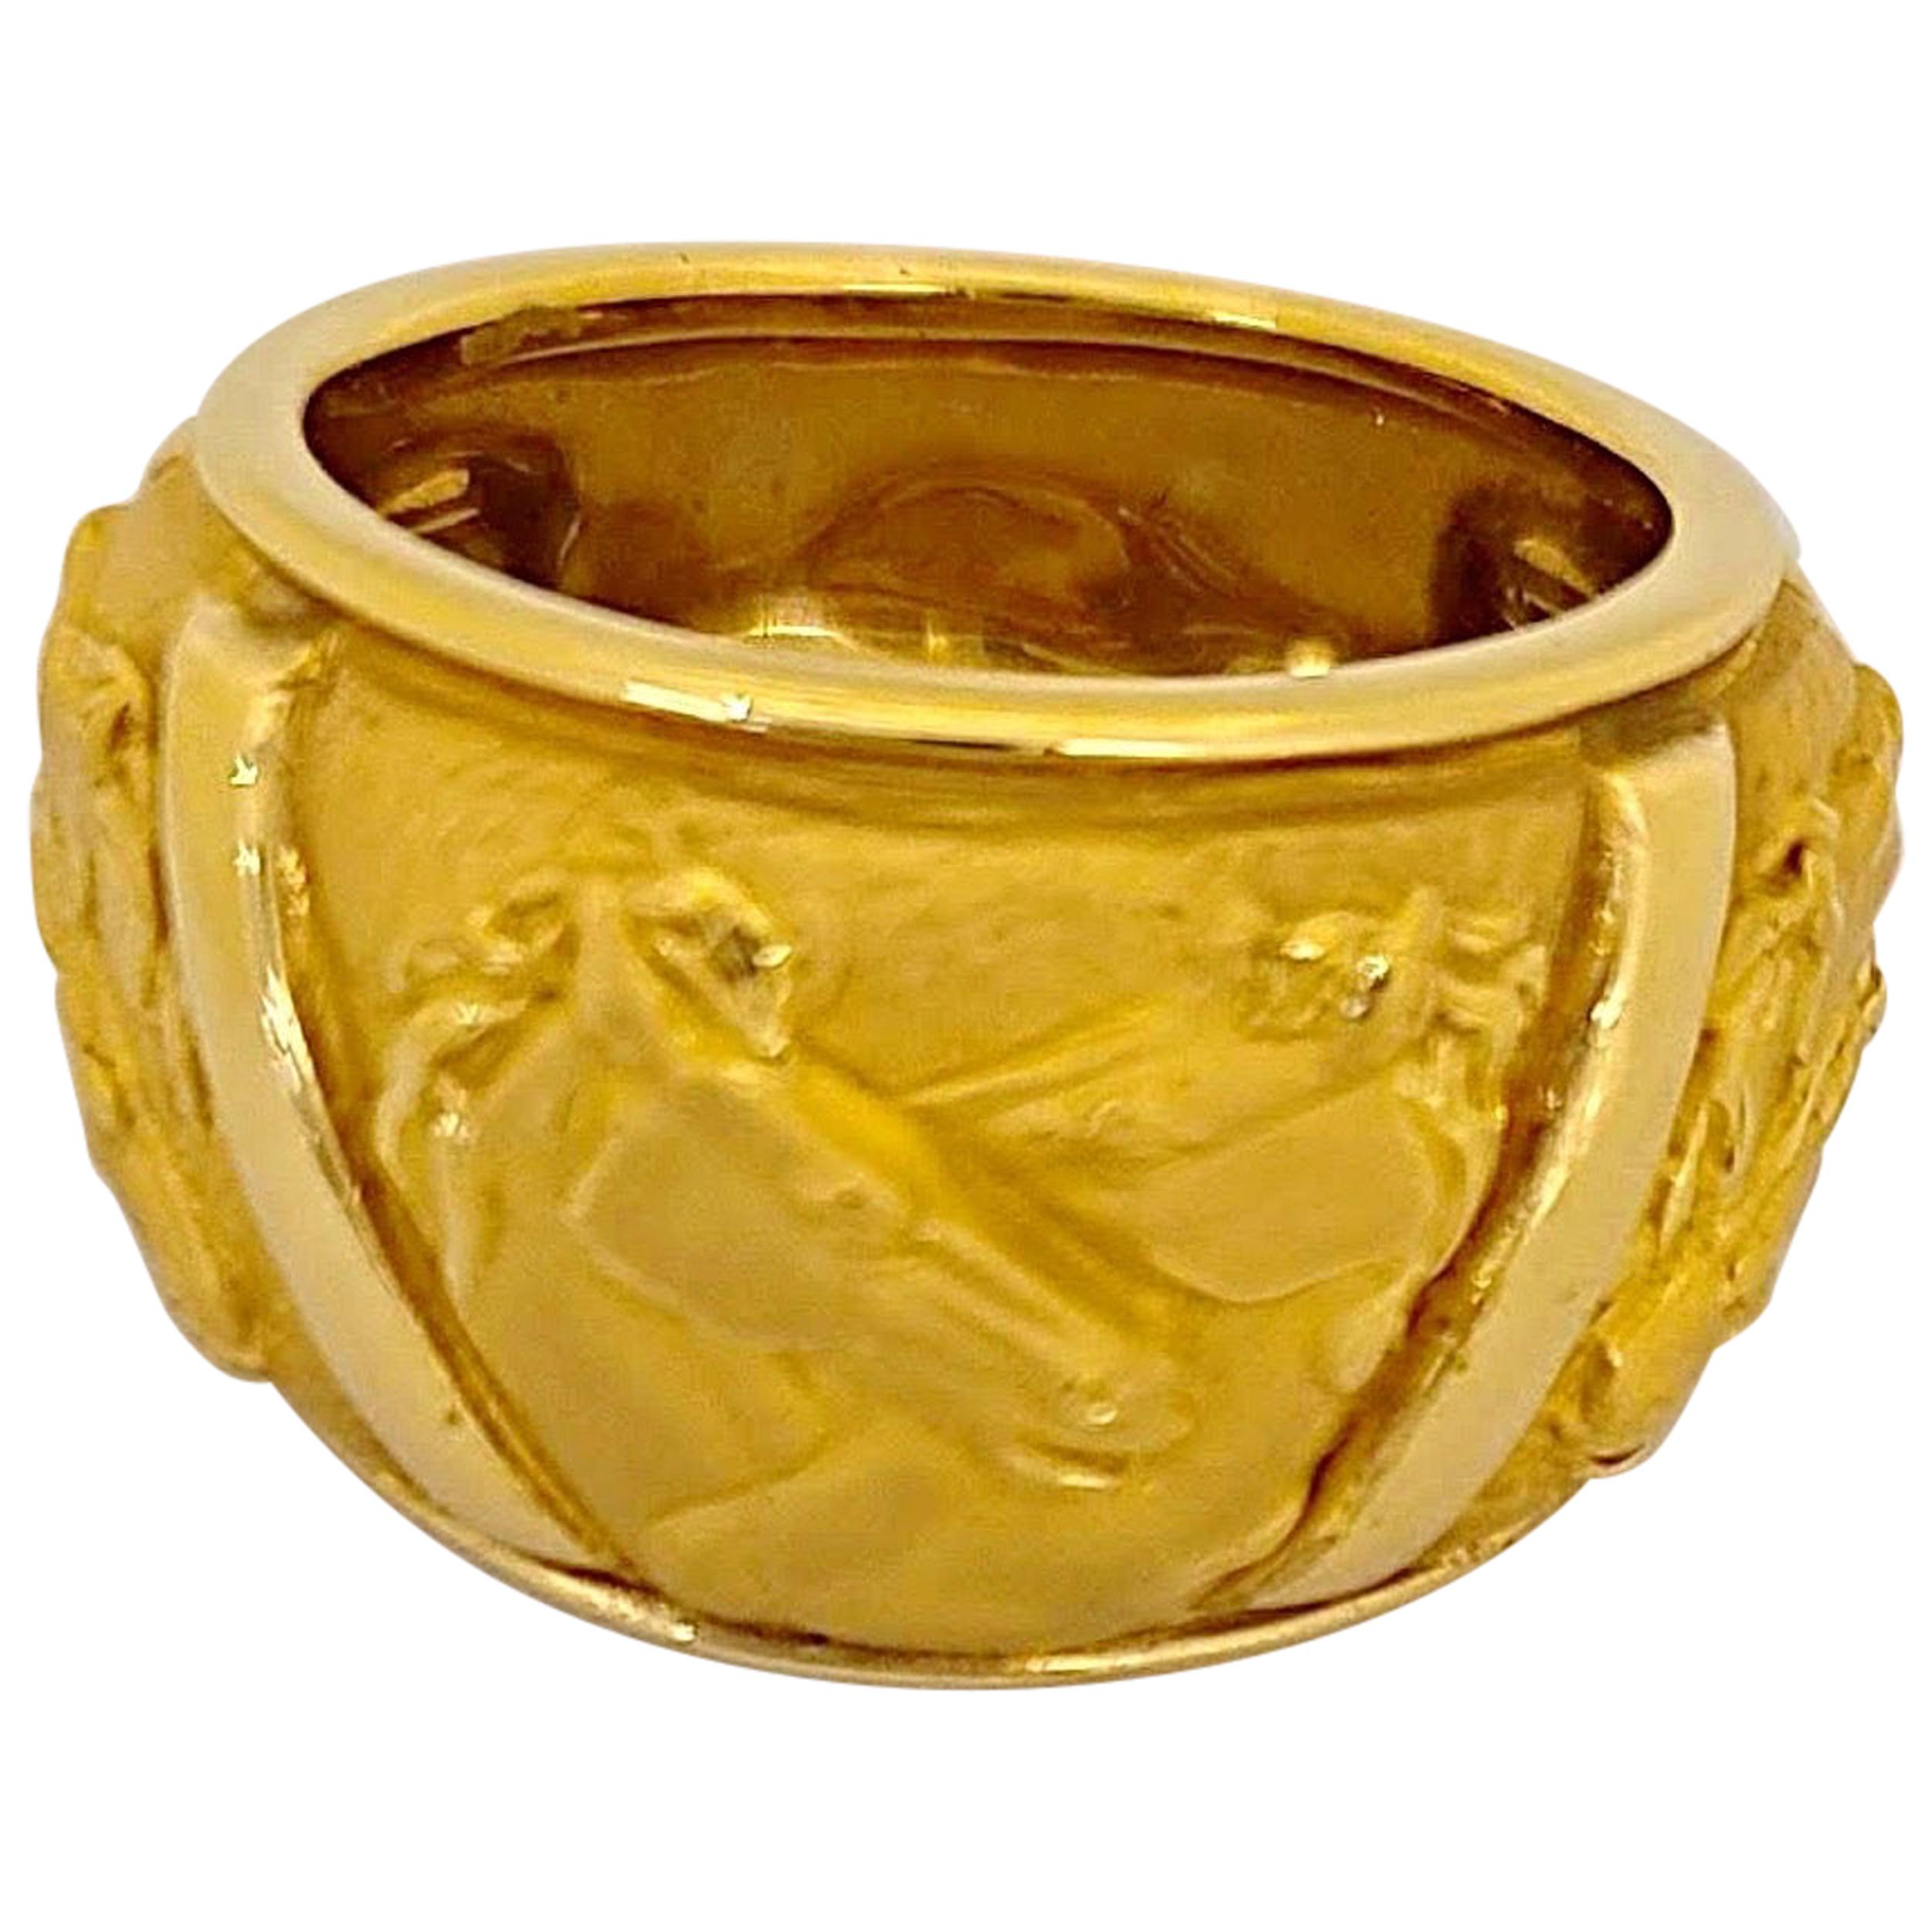 Carrera y Carrera 18 Karat Yellow Gold "Mosaico" Ring with Horses For Sale